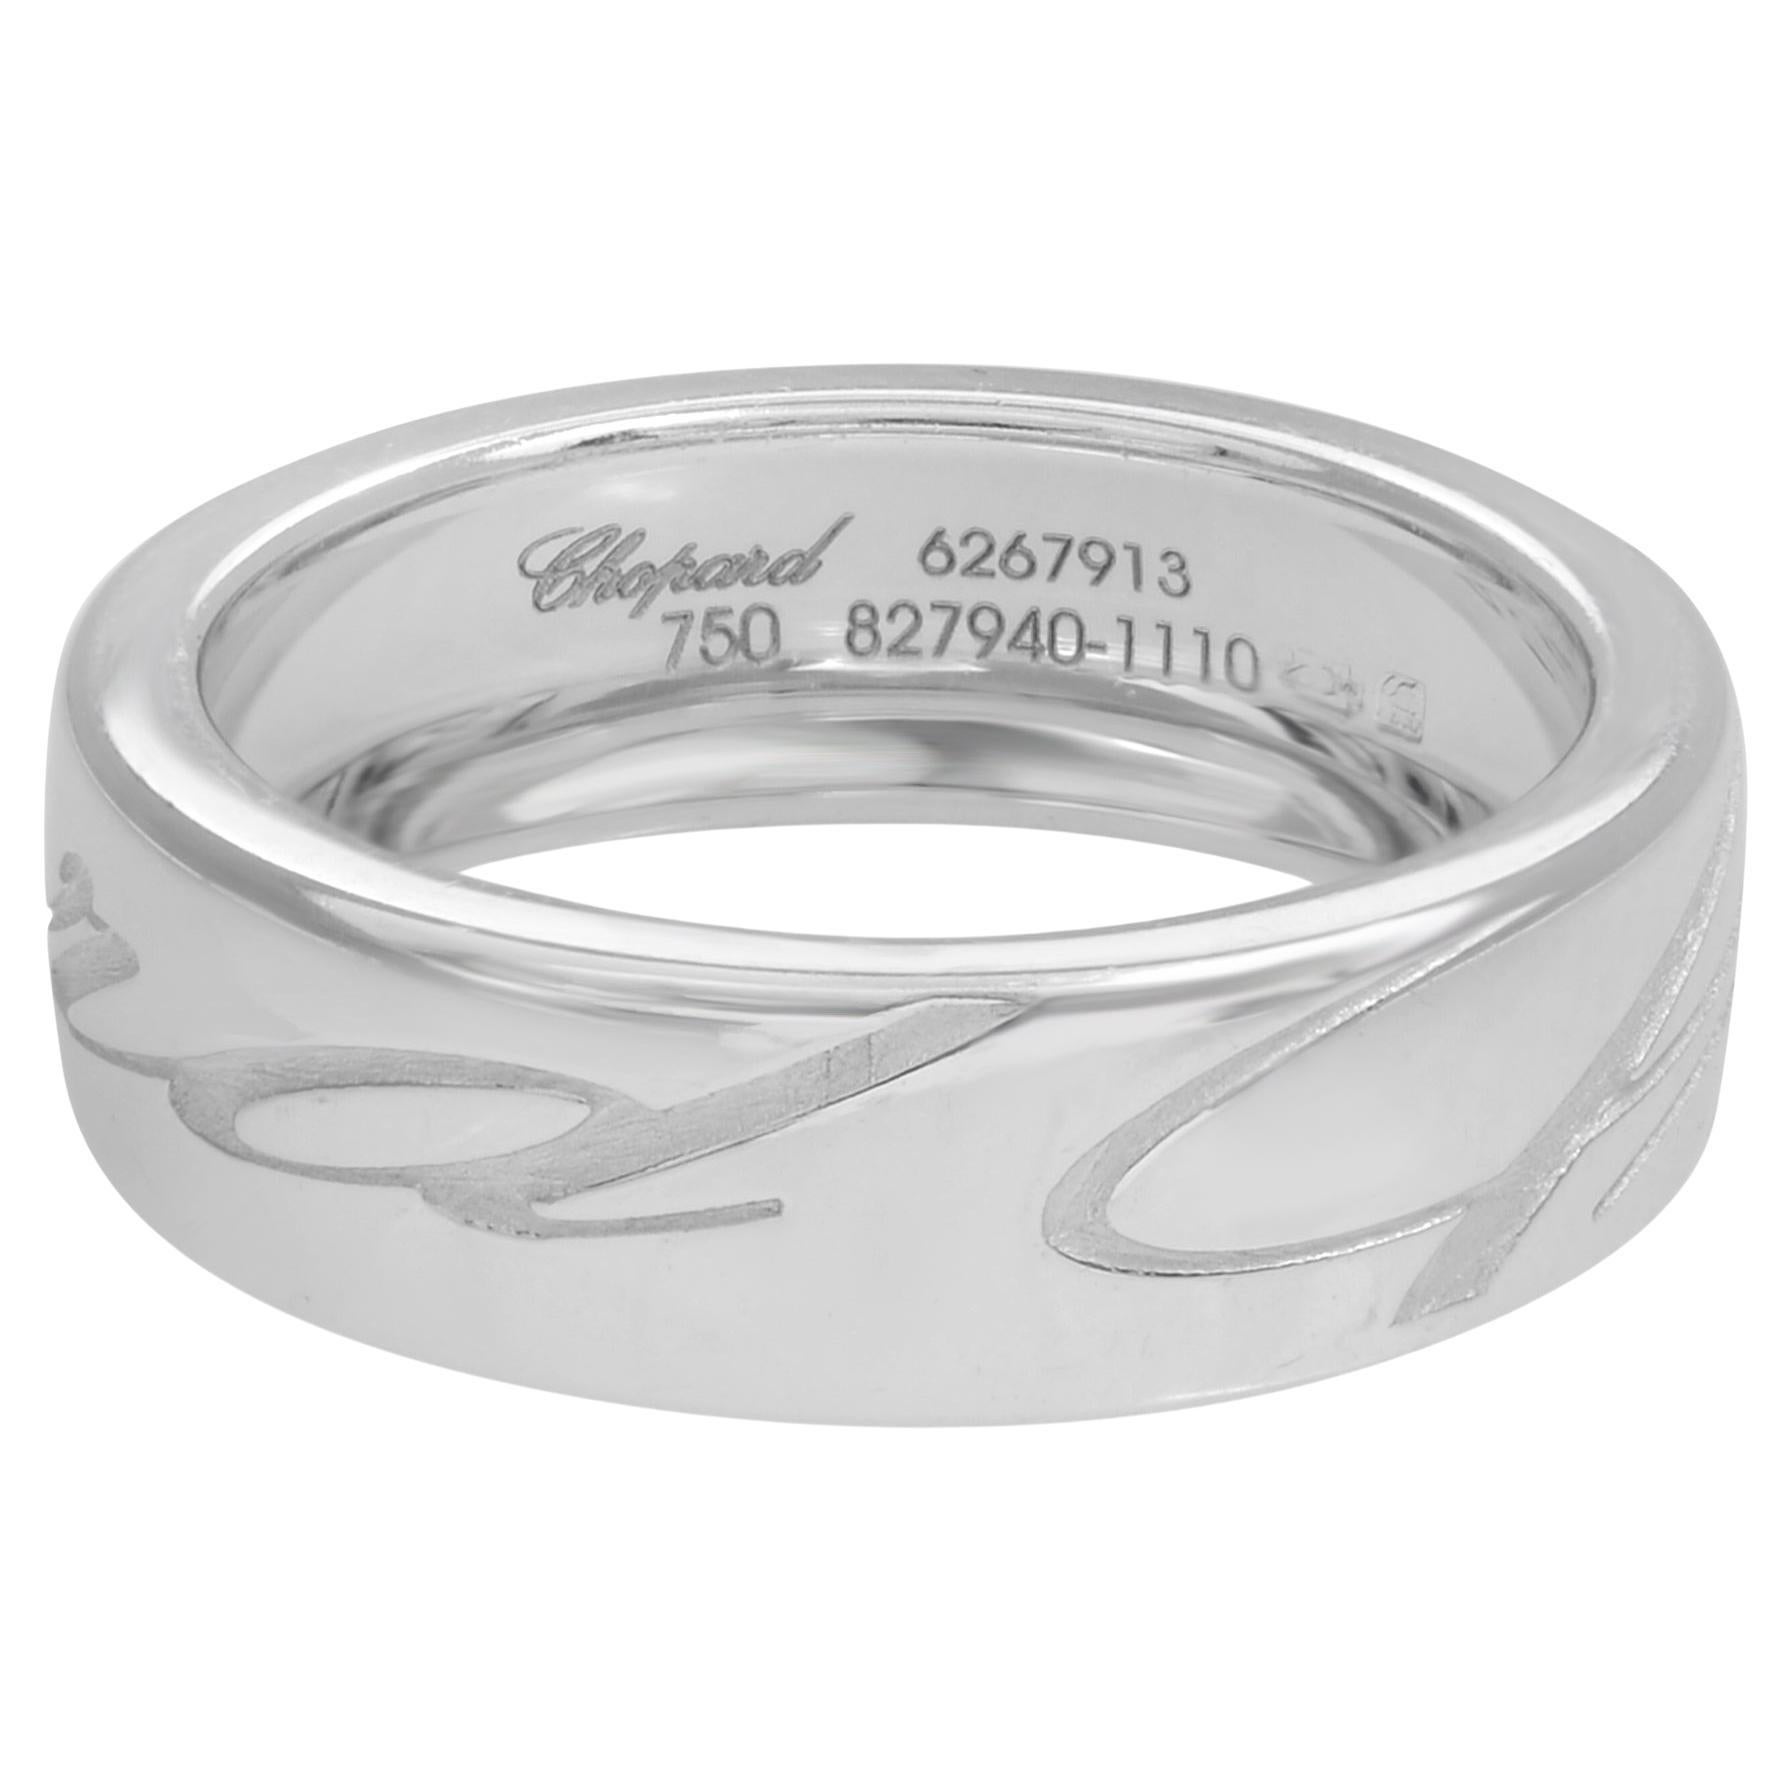 Chopard Chopardissimo Ethical Ring 18K White Gold For Sale